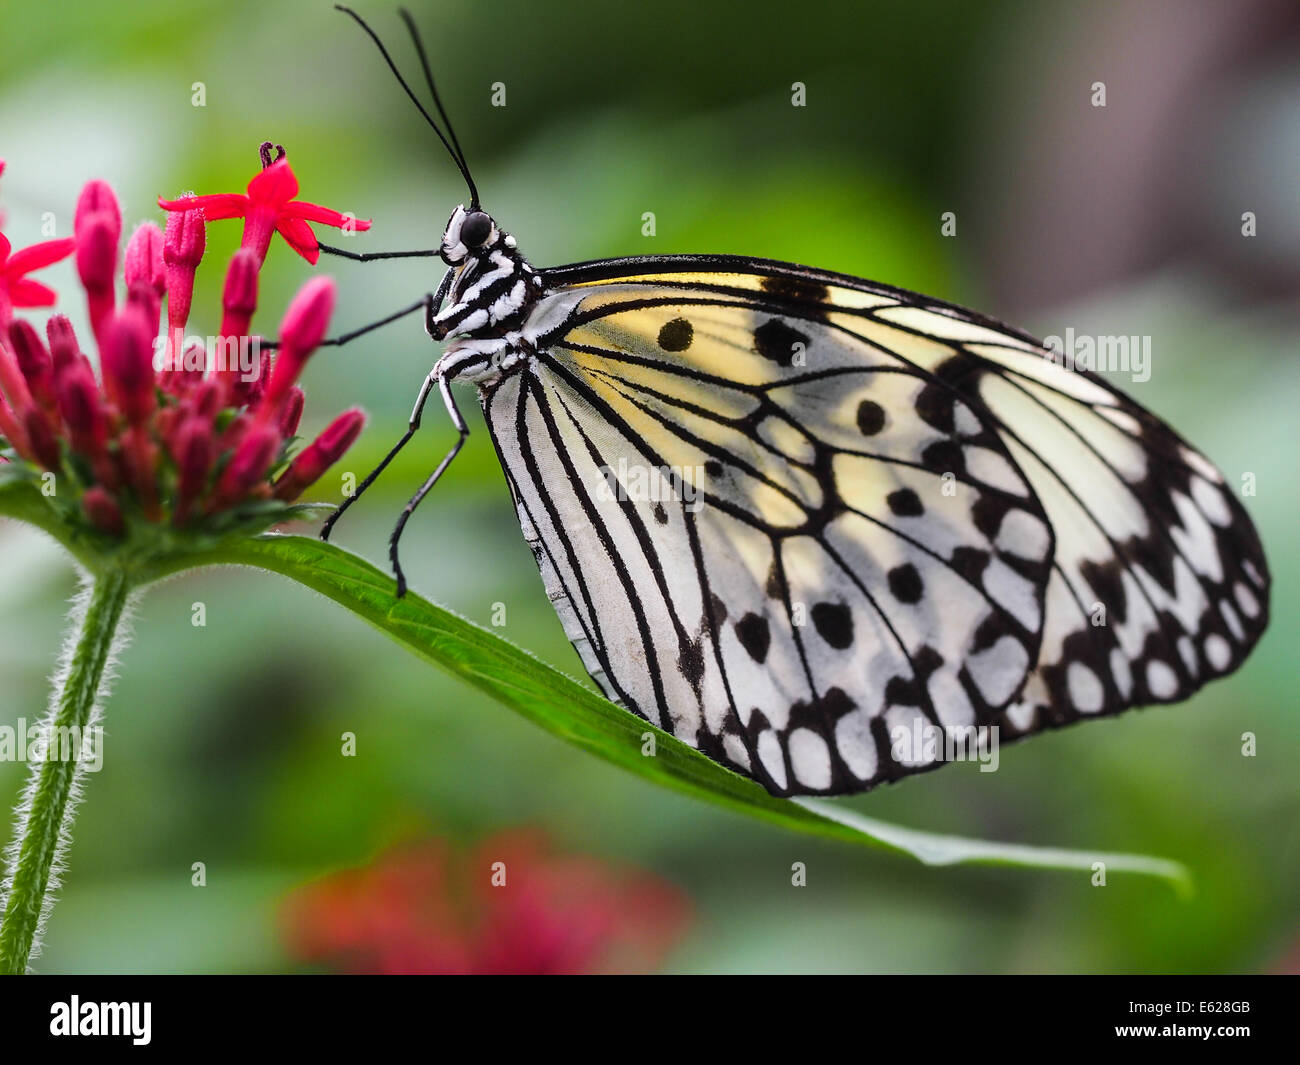 beautiful nature butterfly black and white Stock Photo